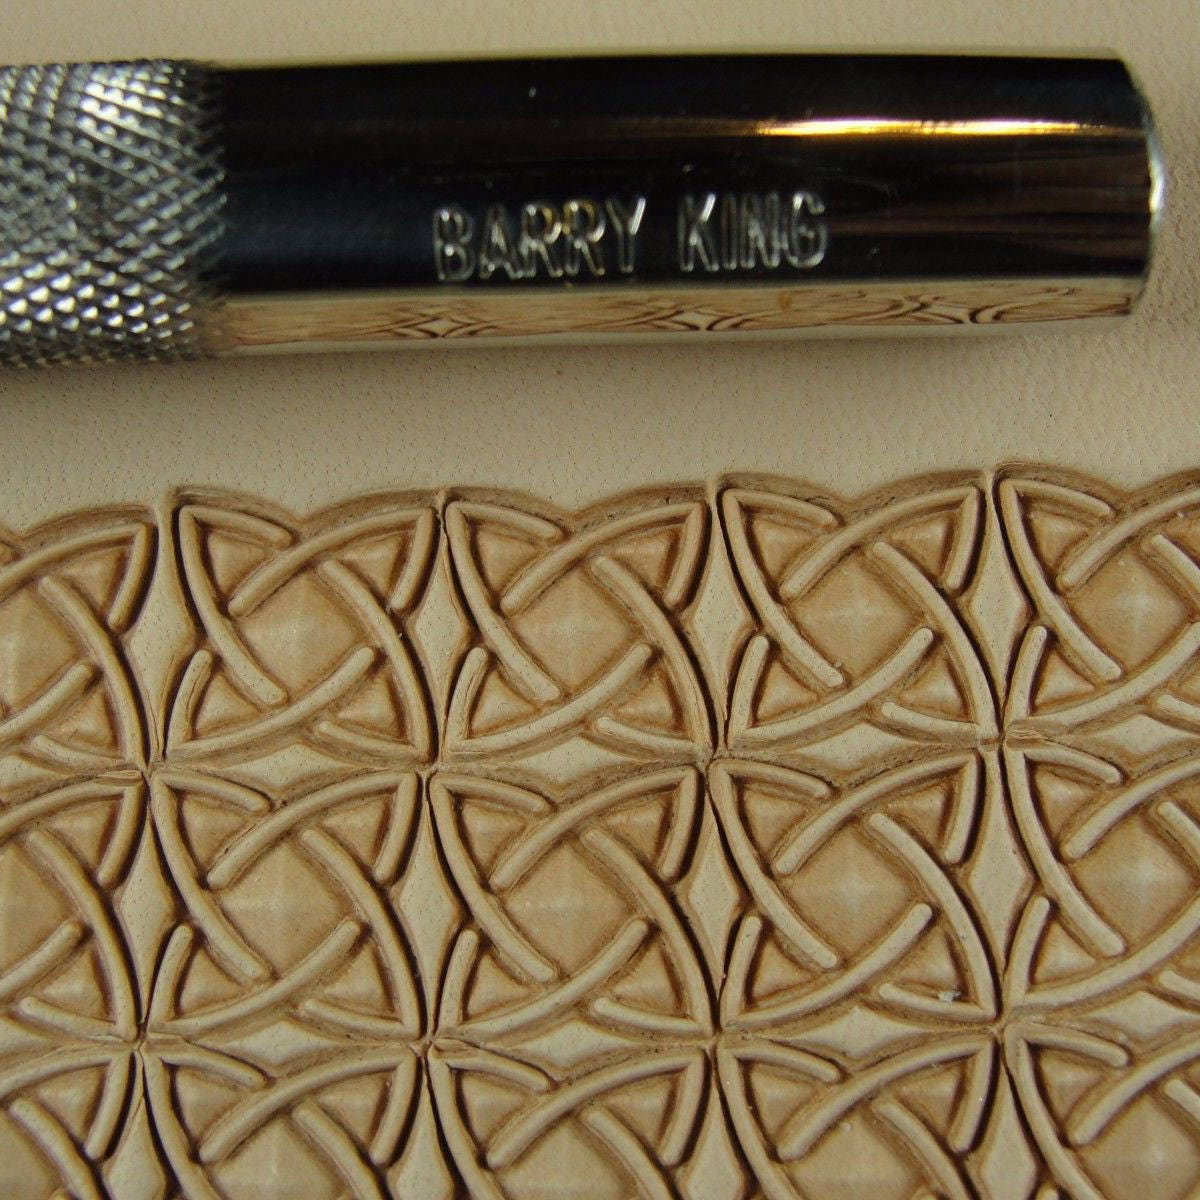 Stainless Steel Barry King - #1 Arched Lined Veiner Stamp (Leather Stamping  Tool)